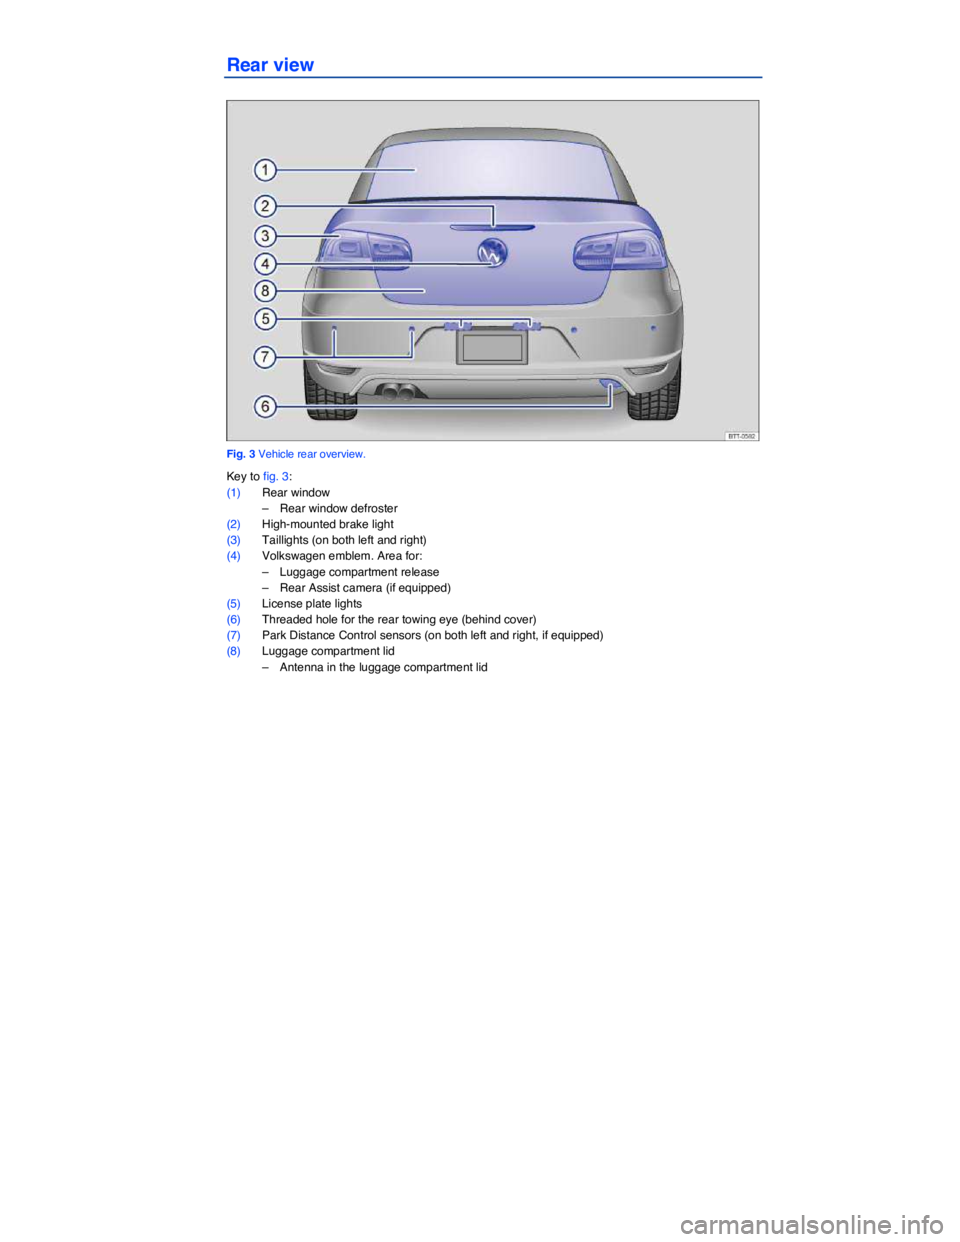 VOLKSWAGEN EOS 2010  Owners Manual  
 
Rear view 
 
Fig. 3 Vehicle rear overview. 
Key to fig. 3: 
(1) Rear window 
–  Rear window defroster  
(2) High-mounted brake light 
(3) Taillights (on both left and right)  
(4) Volkswagen emb